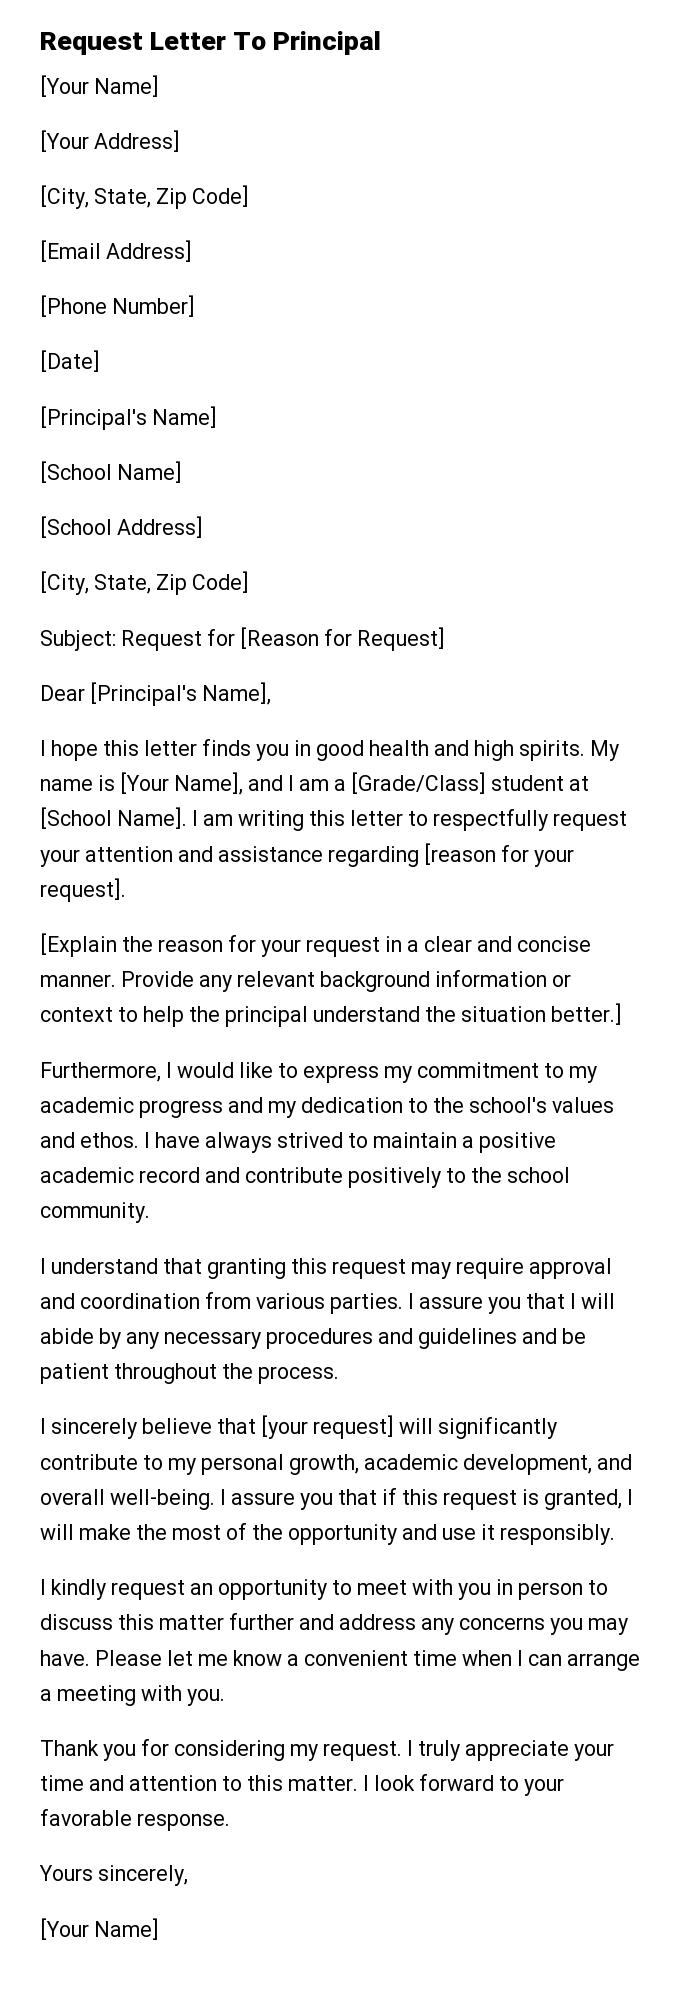 Request Letter To Principal